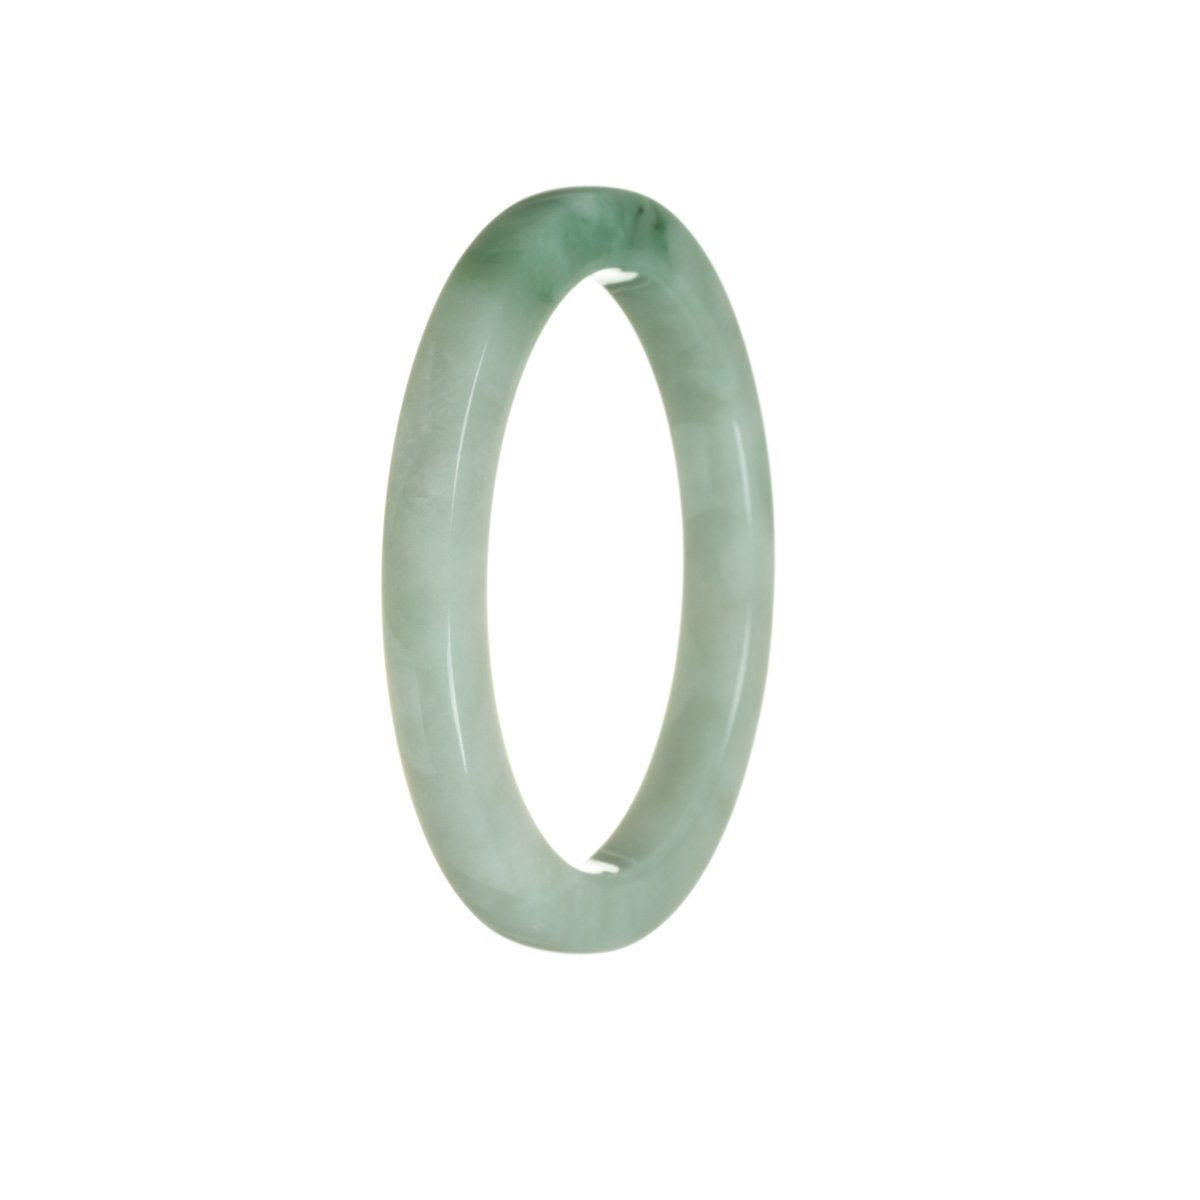 A delicate pale green jadeite bangle bracelet, measuring 56mm in diameter. This authentic Grade A piece showcases the natural beauty and elegance of jadeite. Perfect for adding a touch of sophistication to any outfit.